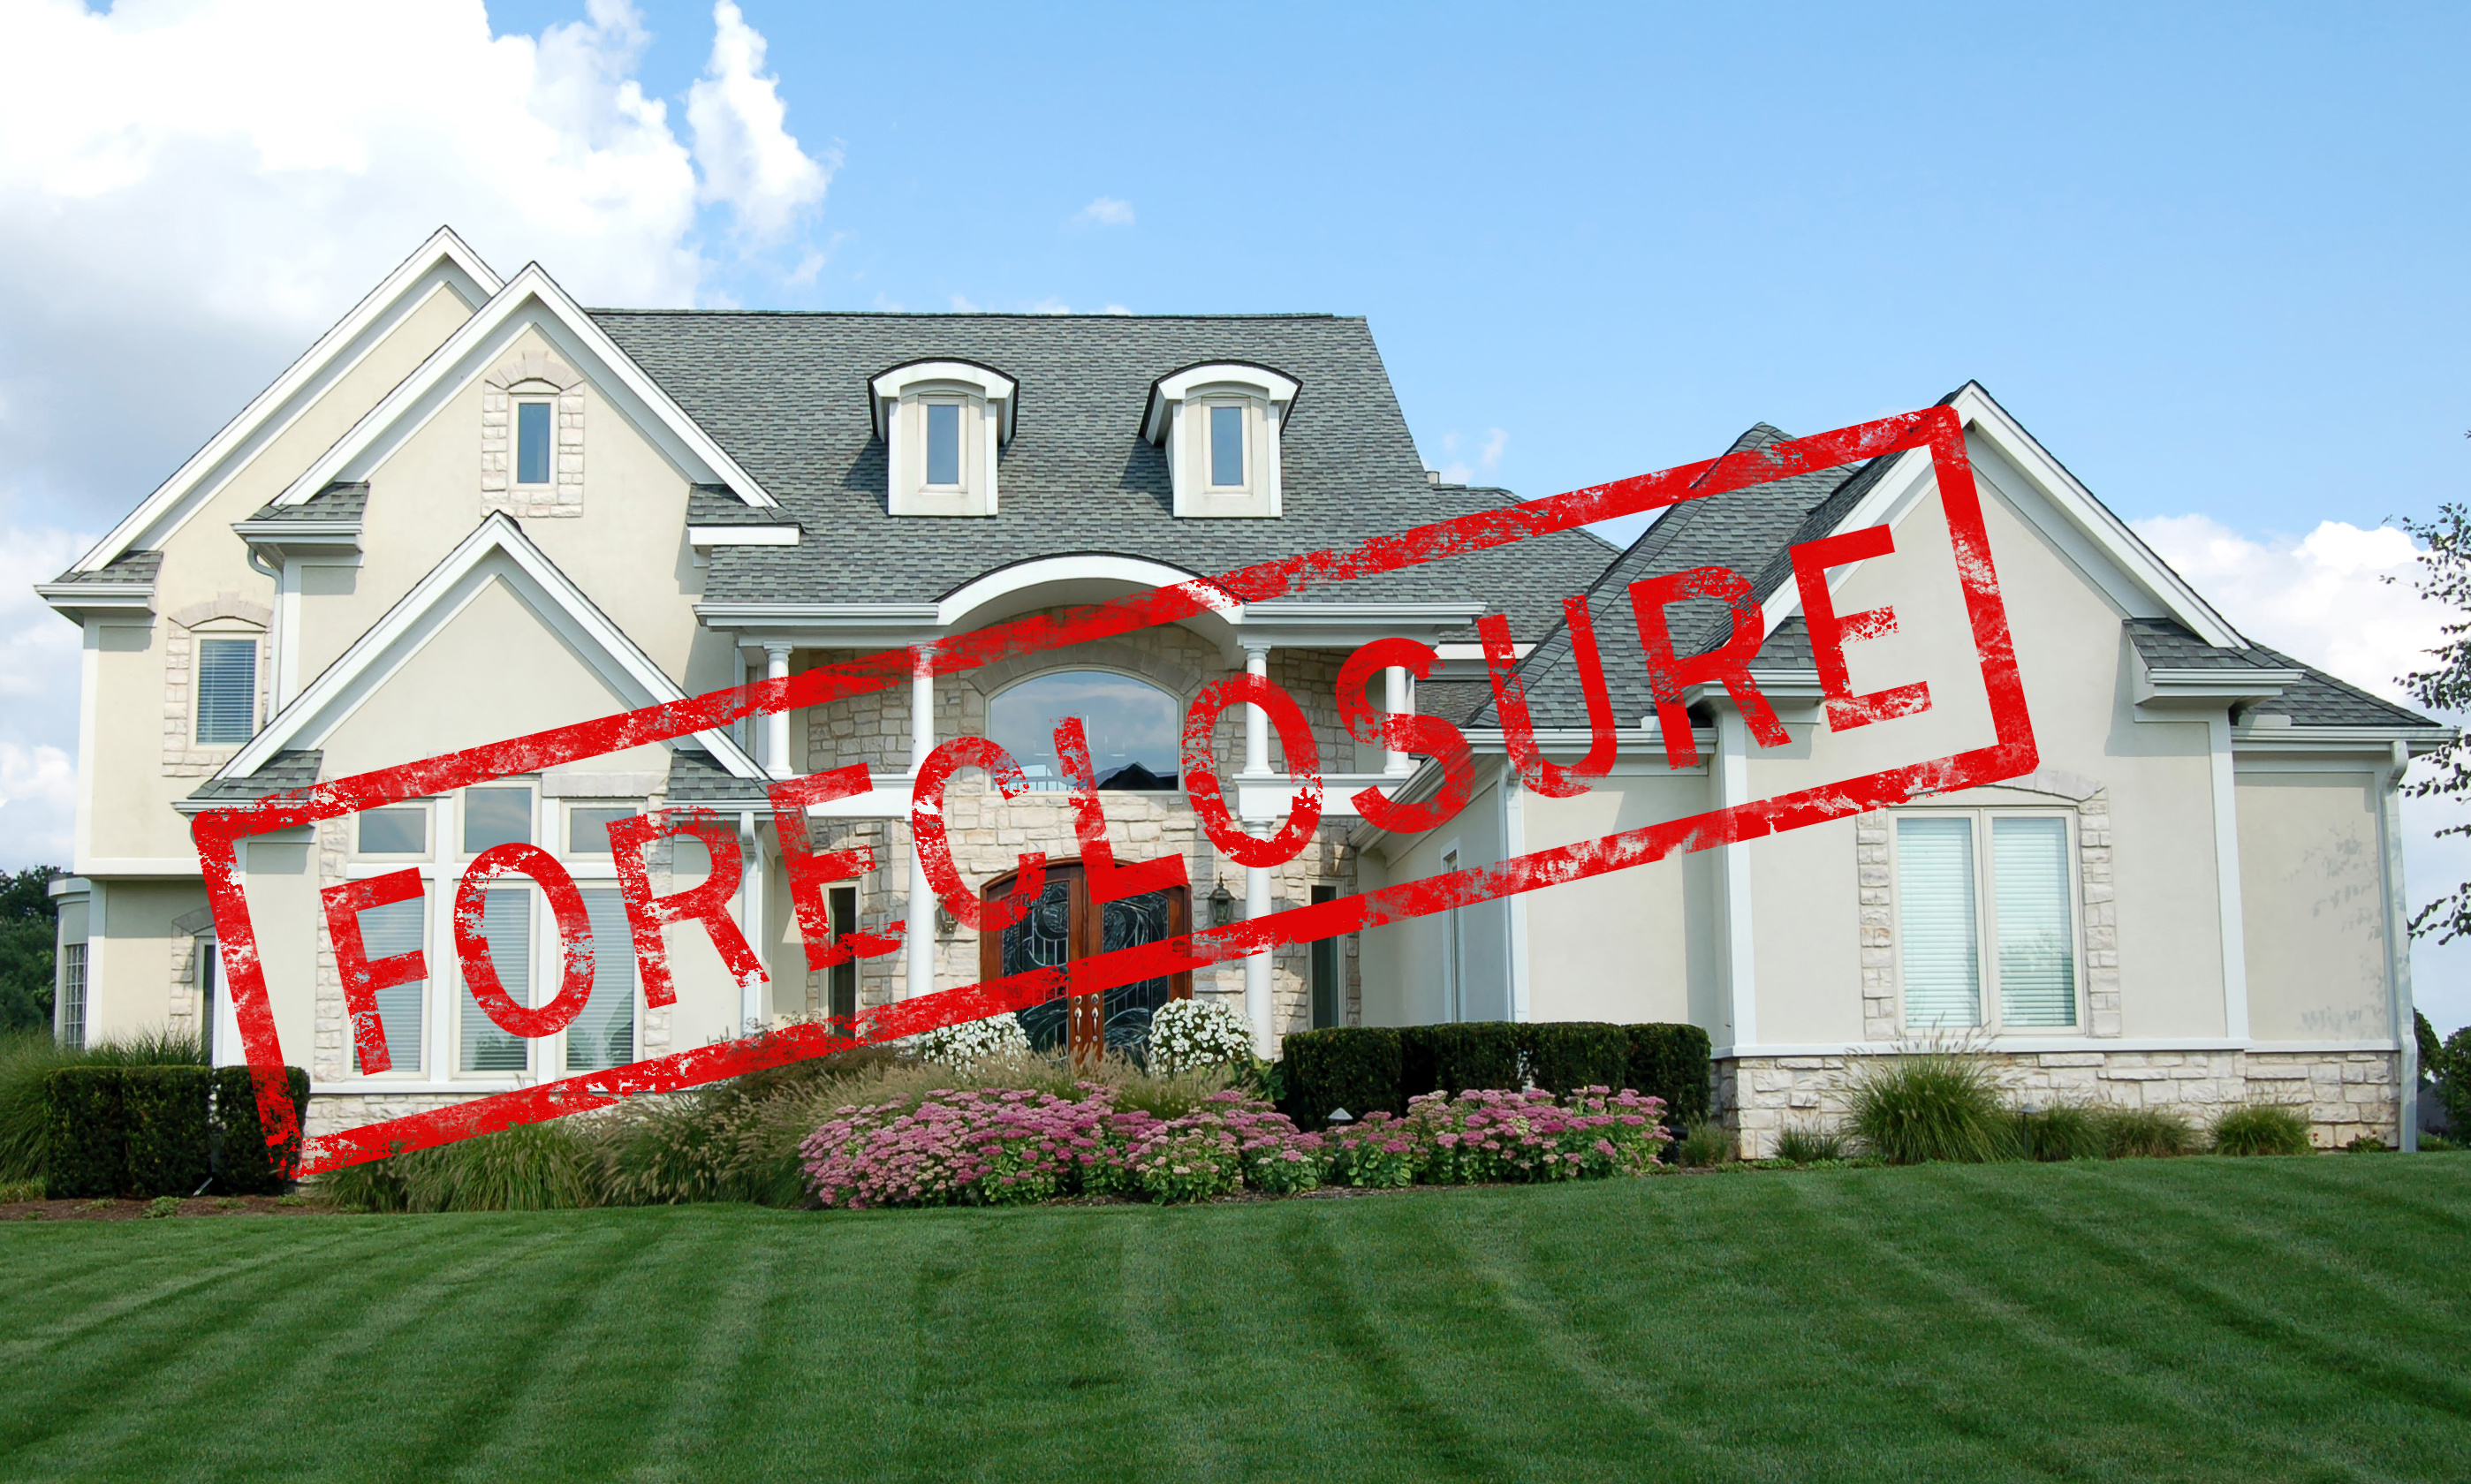 Call Benchmark Appraising, LLC to discuss appraisals pertaining to Forsyth foreclosures